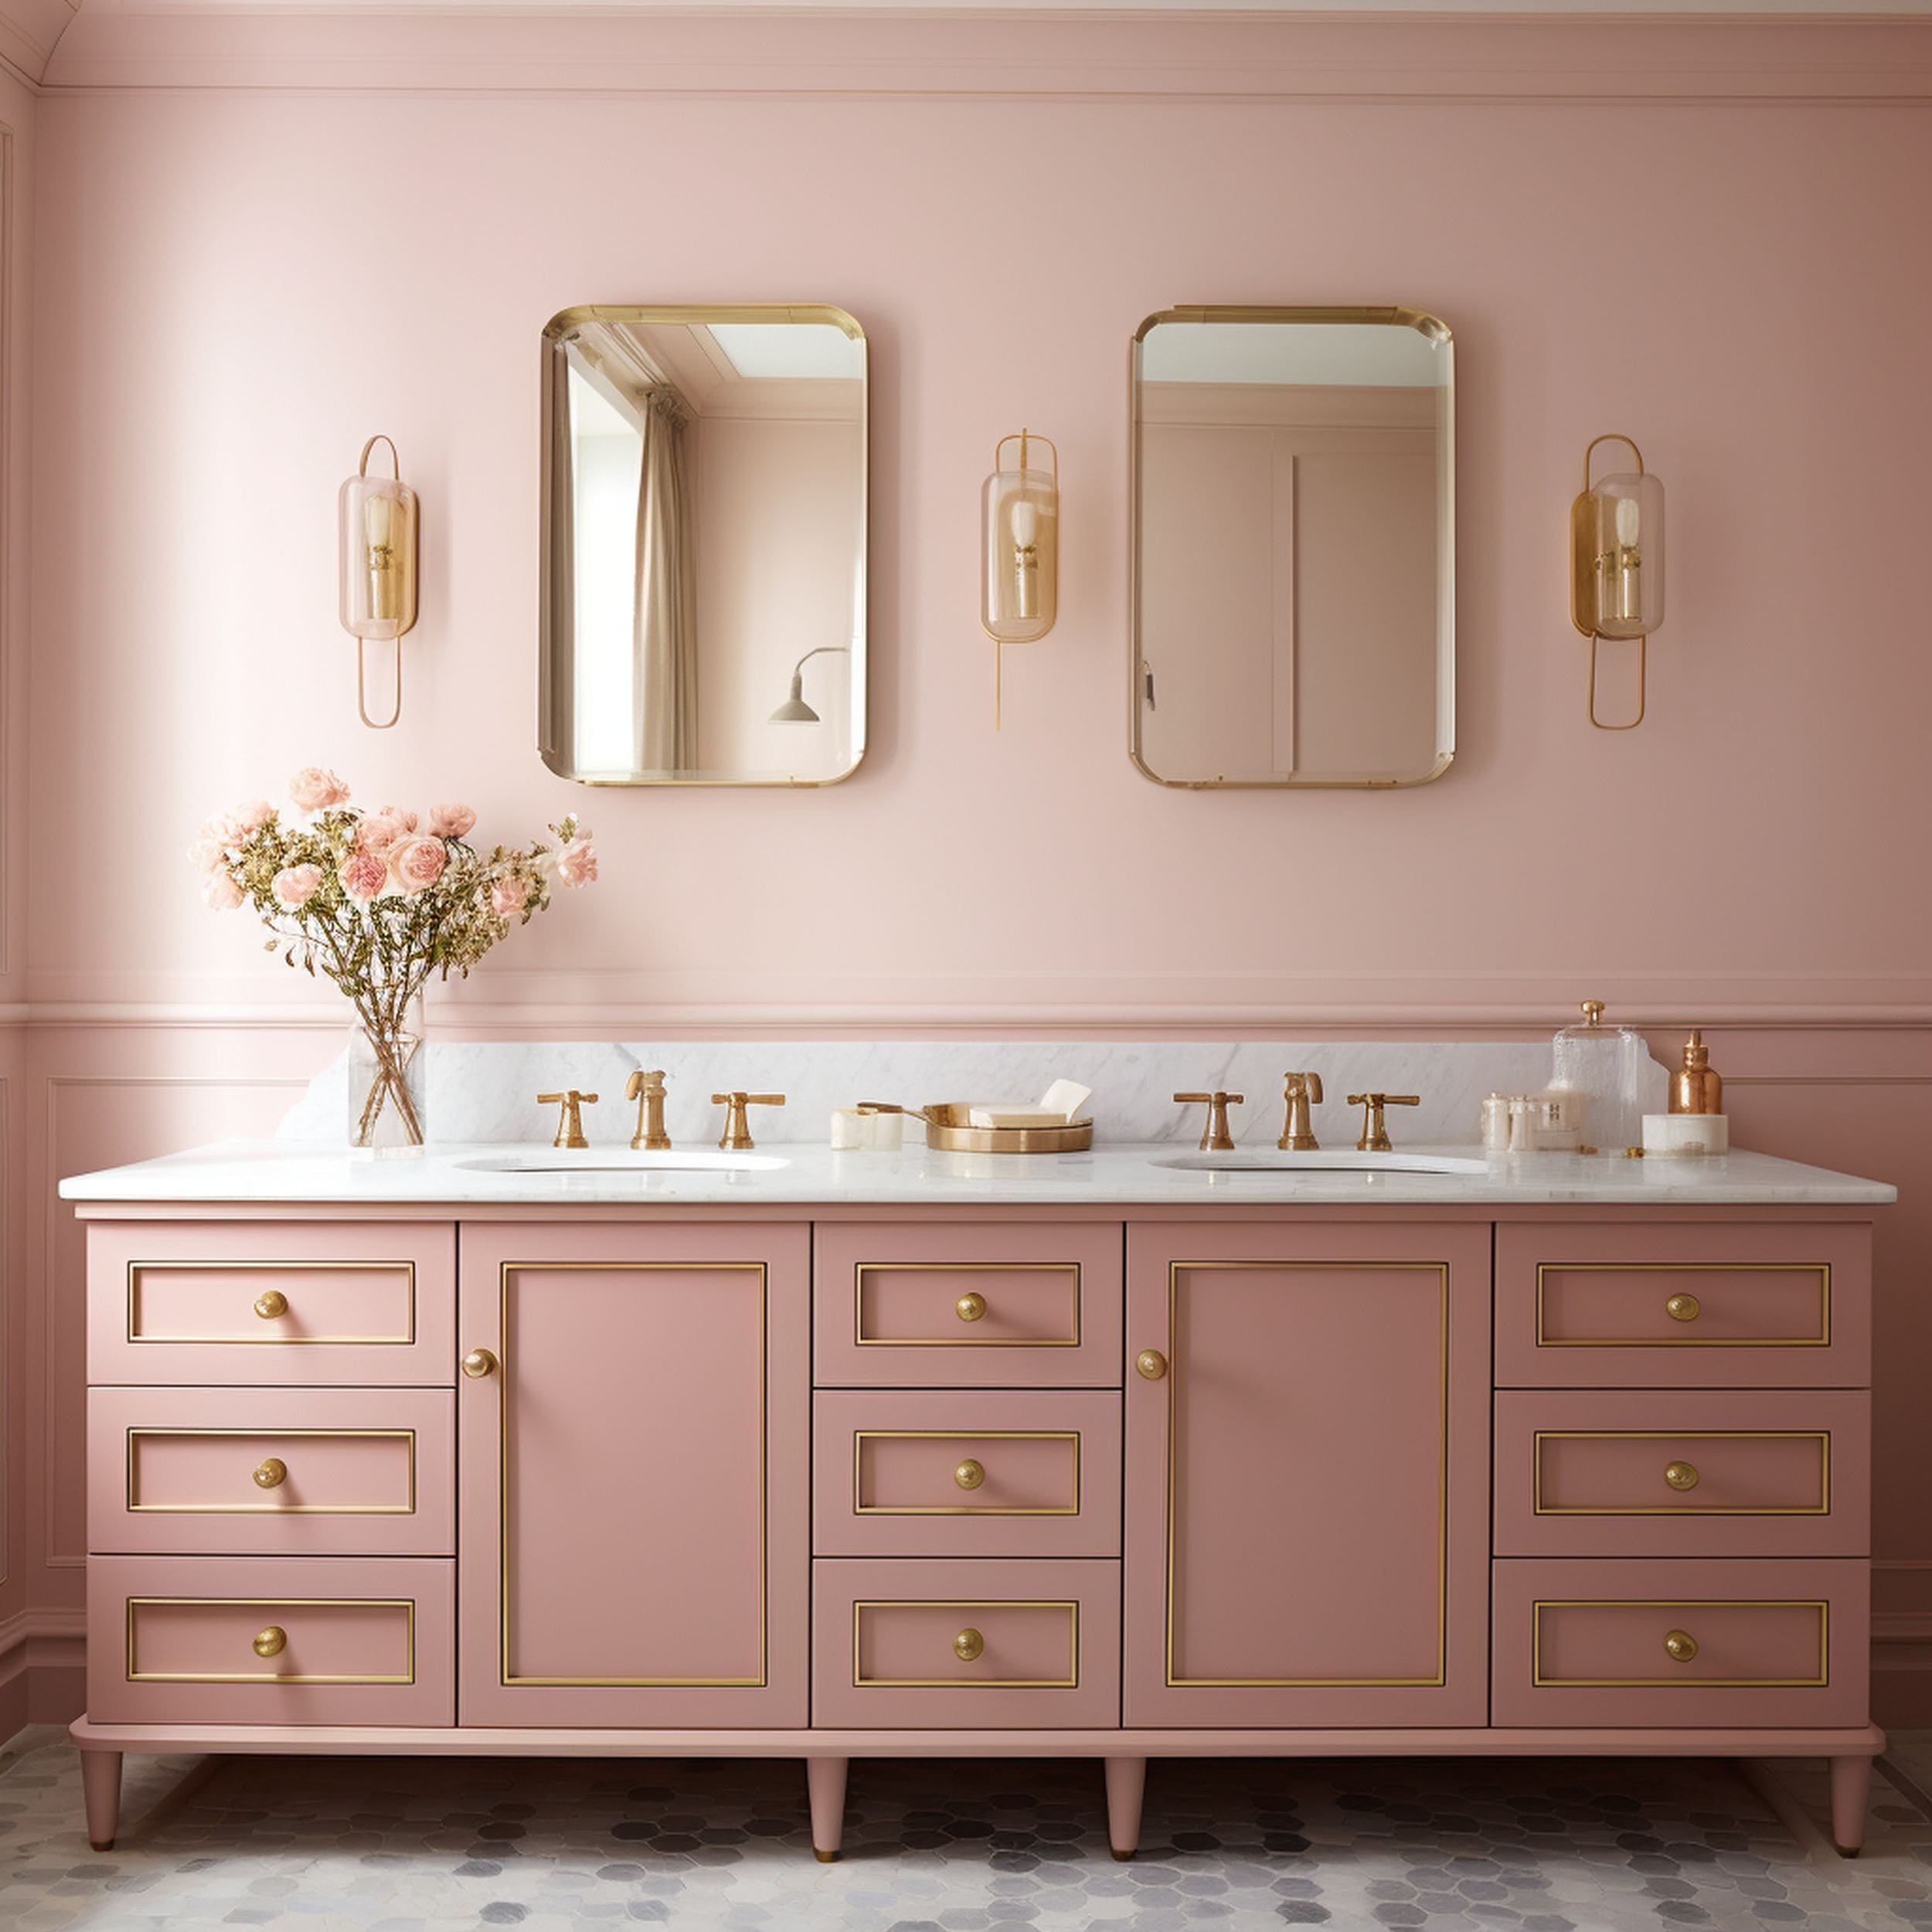 Light Pink Bathroom With Brass Accents